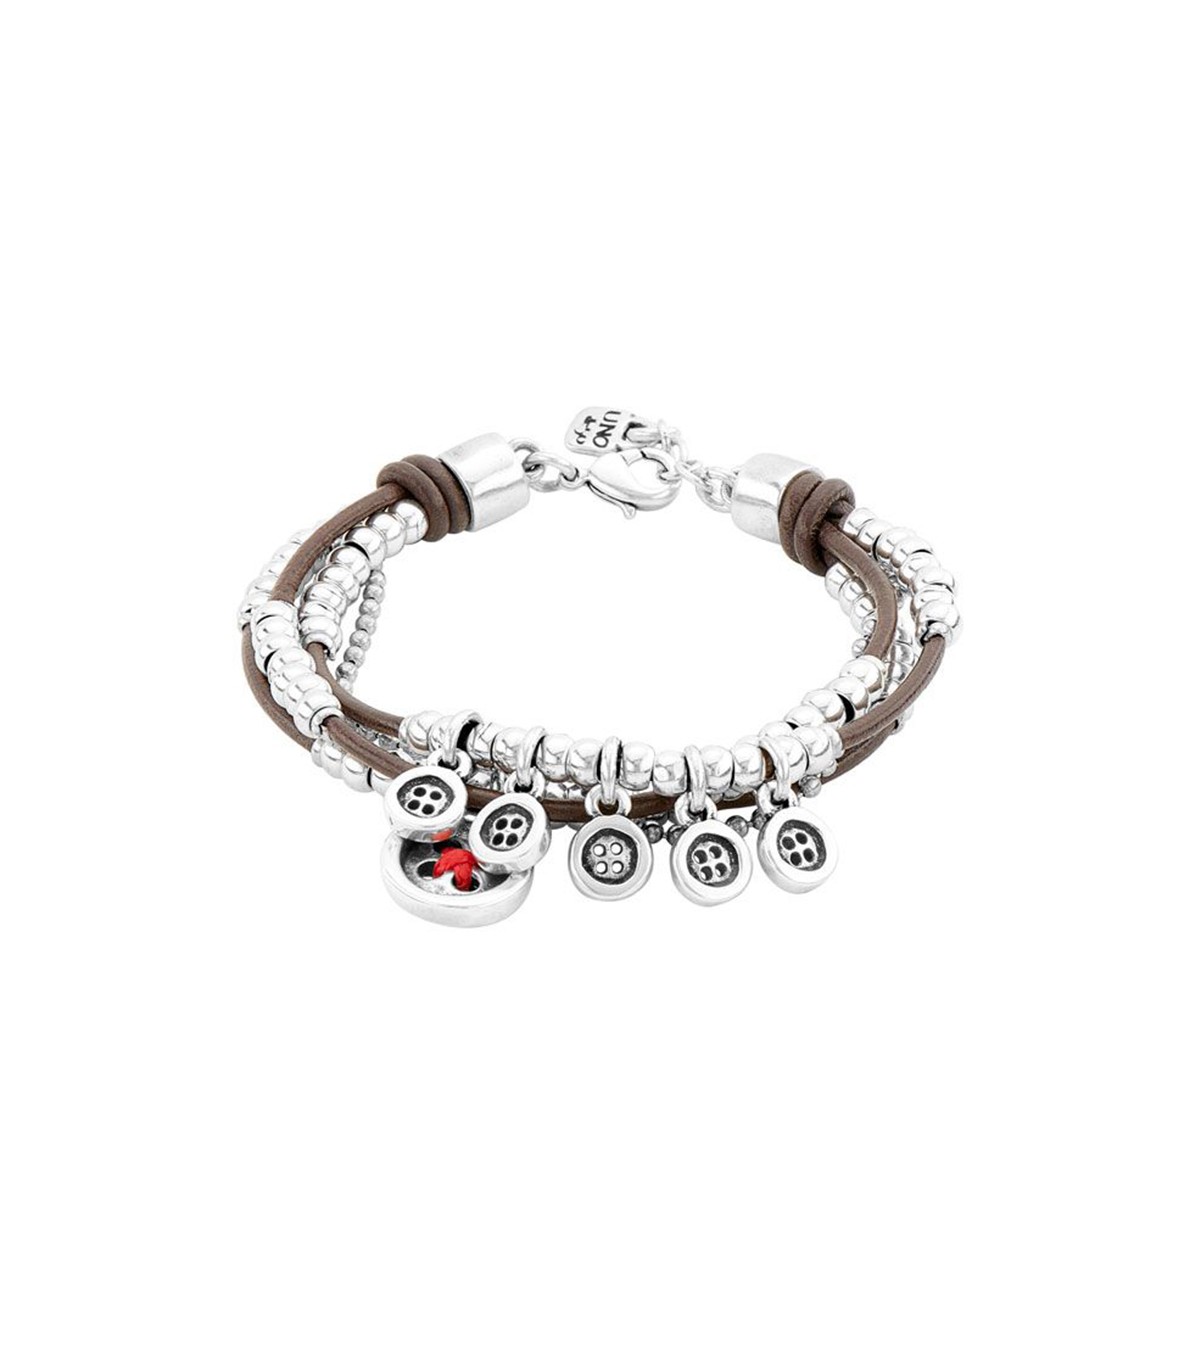 Uno 50 Woman's Bracelet - The Crew in Metal Leather with Buttons - 0